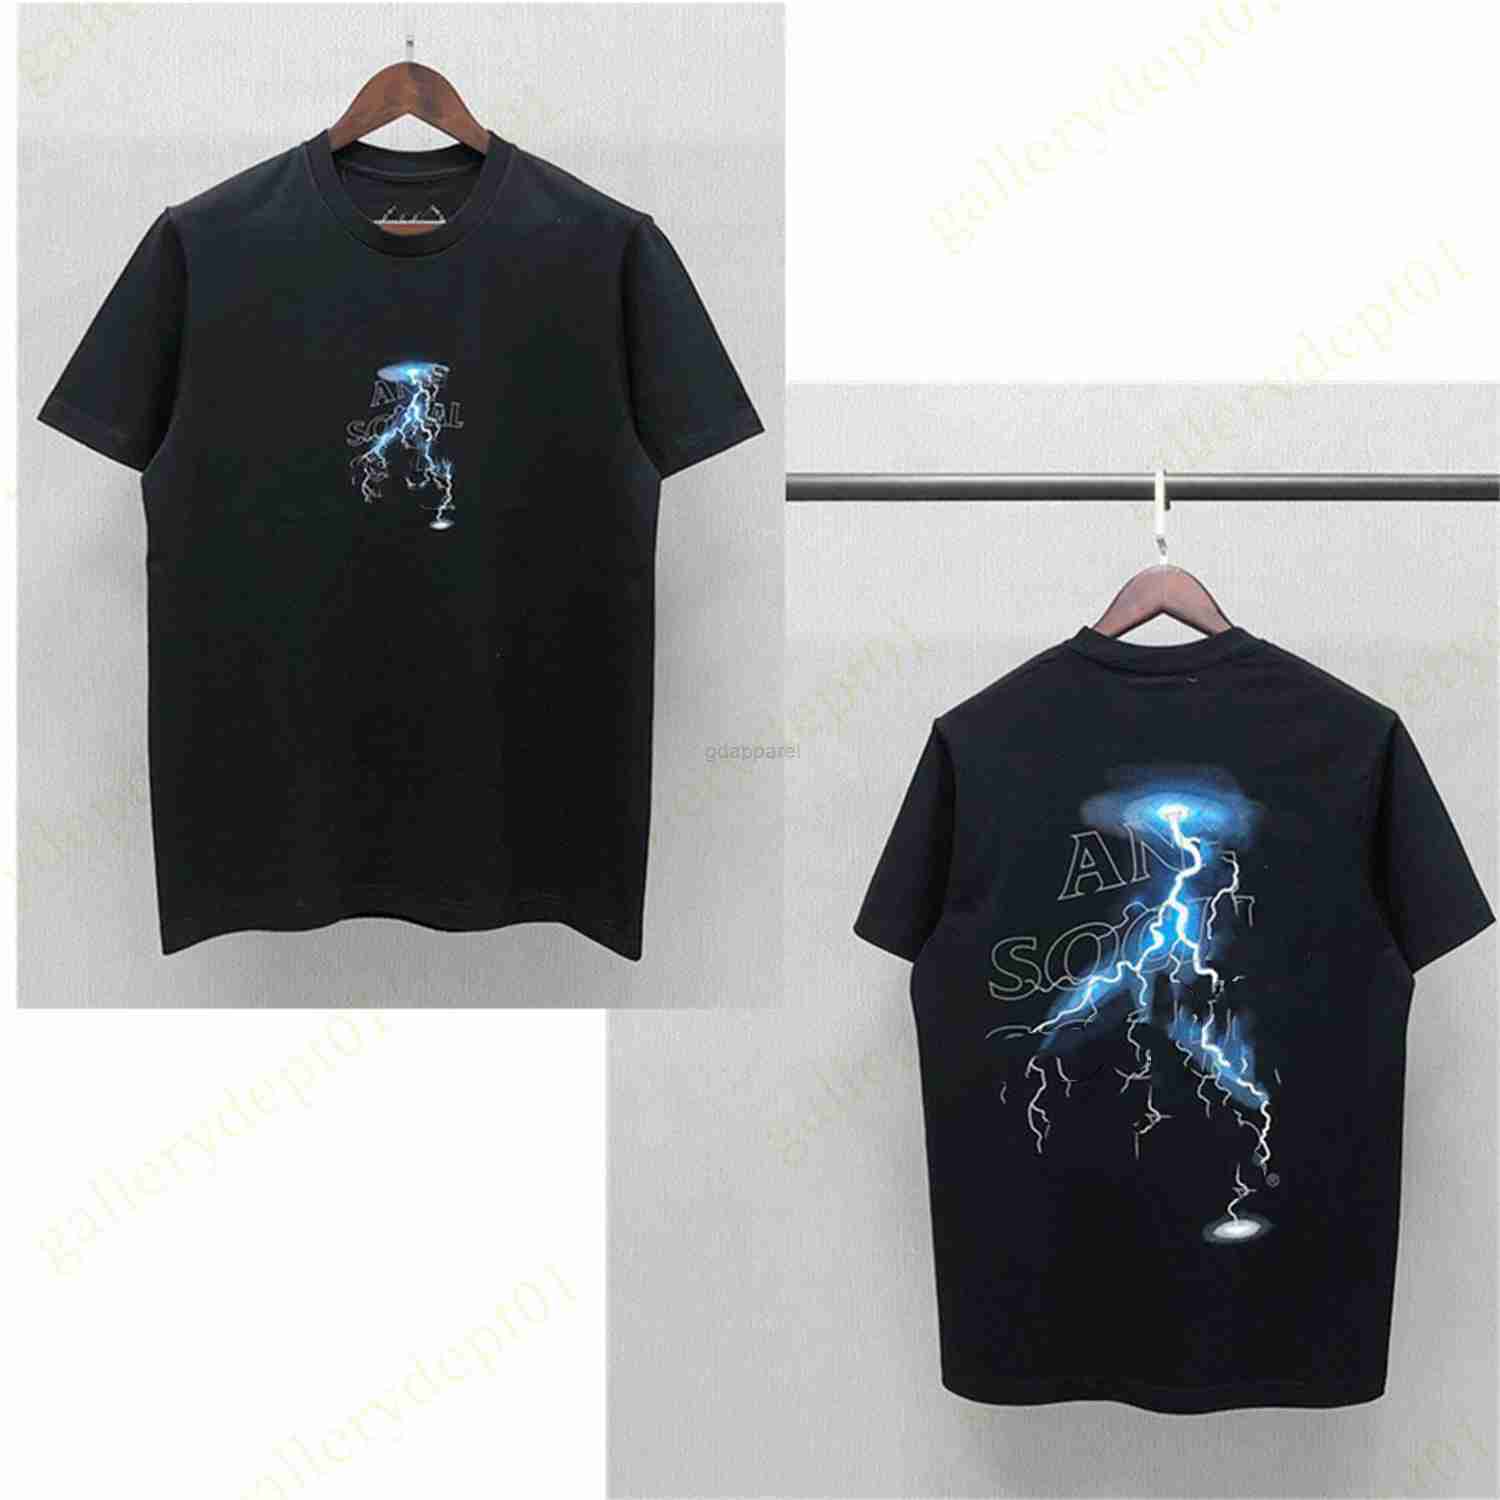 

2022 mens tshirt designer t shirt camouflage glow women clothes loose couple graphic tees oversized fit t-shirt high street graffiti print reflective t shirts A5, Style no. 15